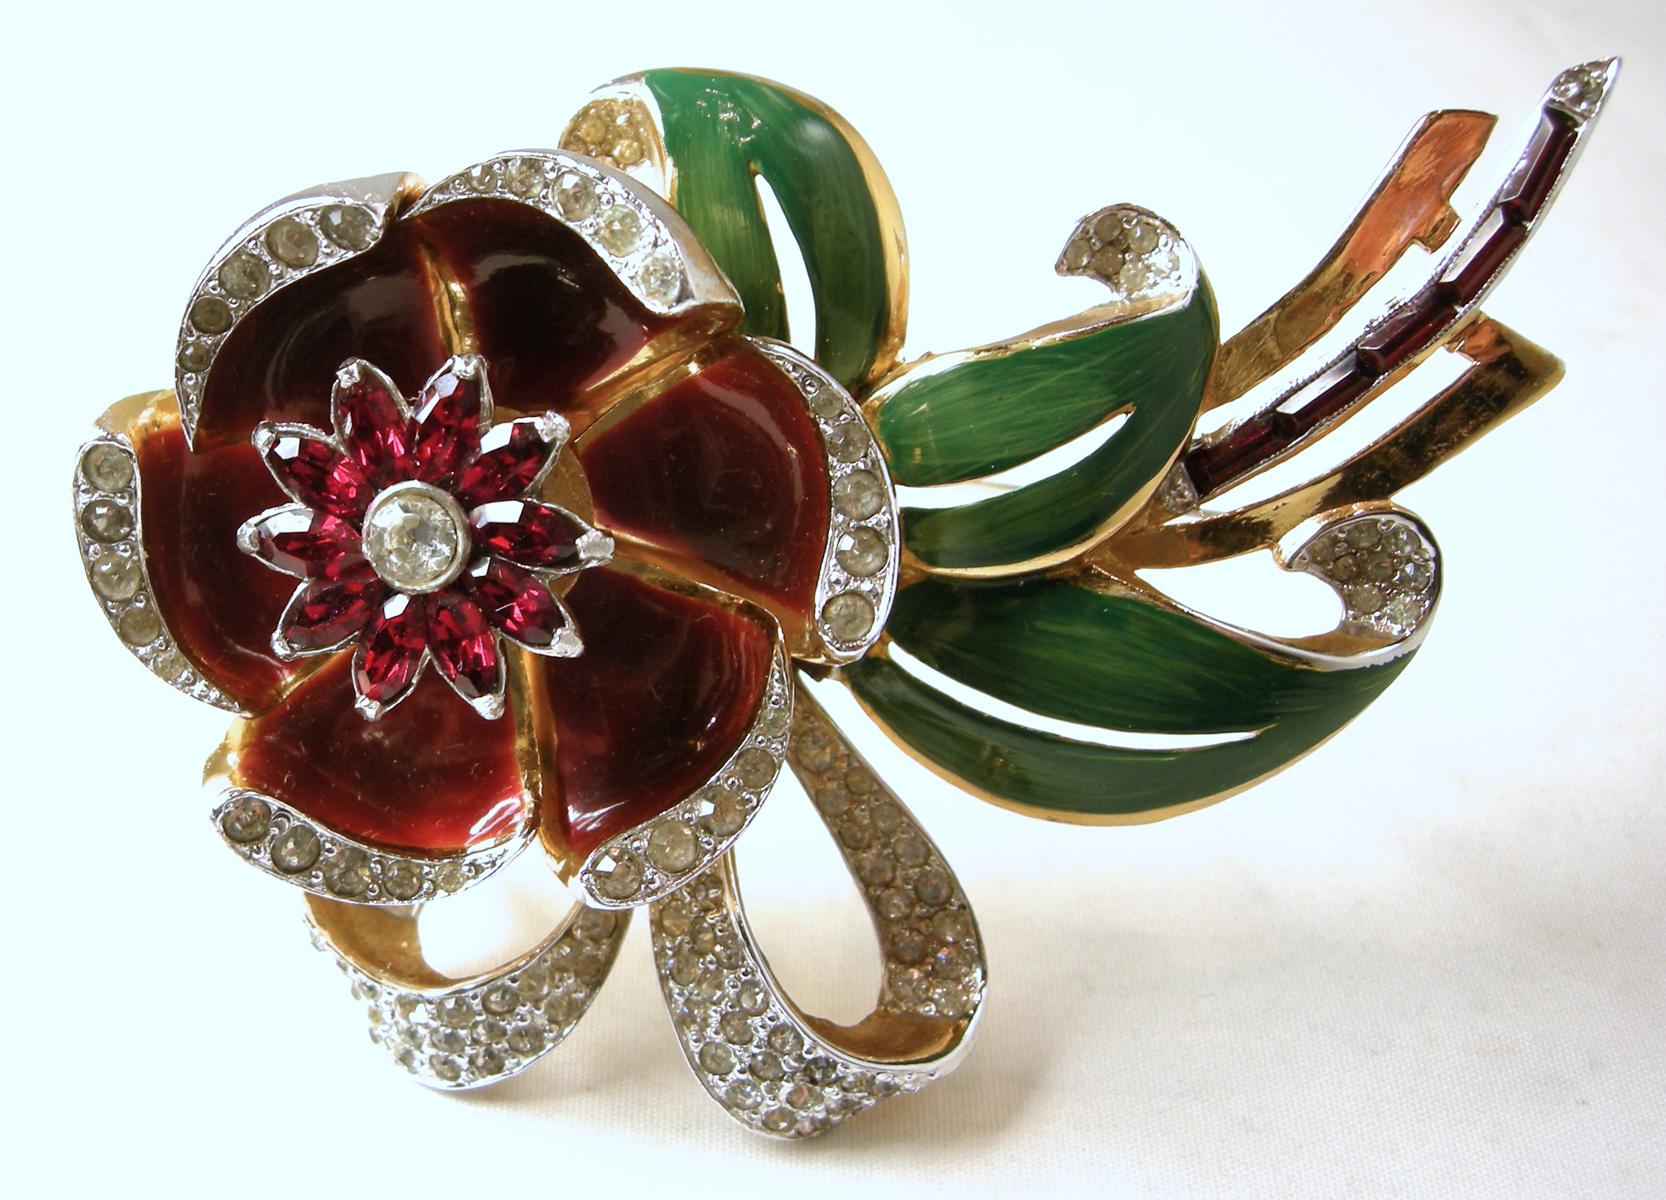 This famous brooch by Coro has a 3-dimensional floral design with brown enameled petals and green enameled leaves. The brooch is accentuated with clear crystals.  The middle of the flower is a trembler and the petals can move open and close.  This